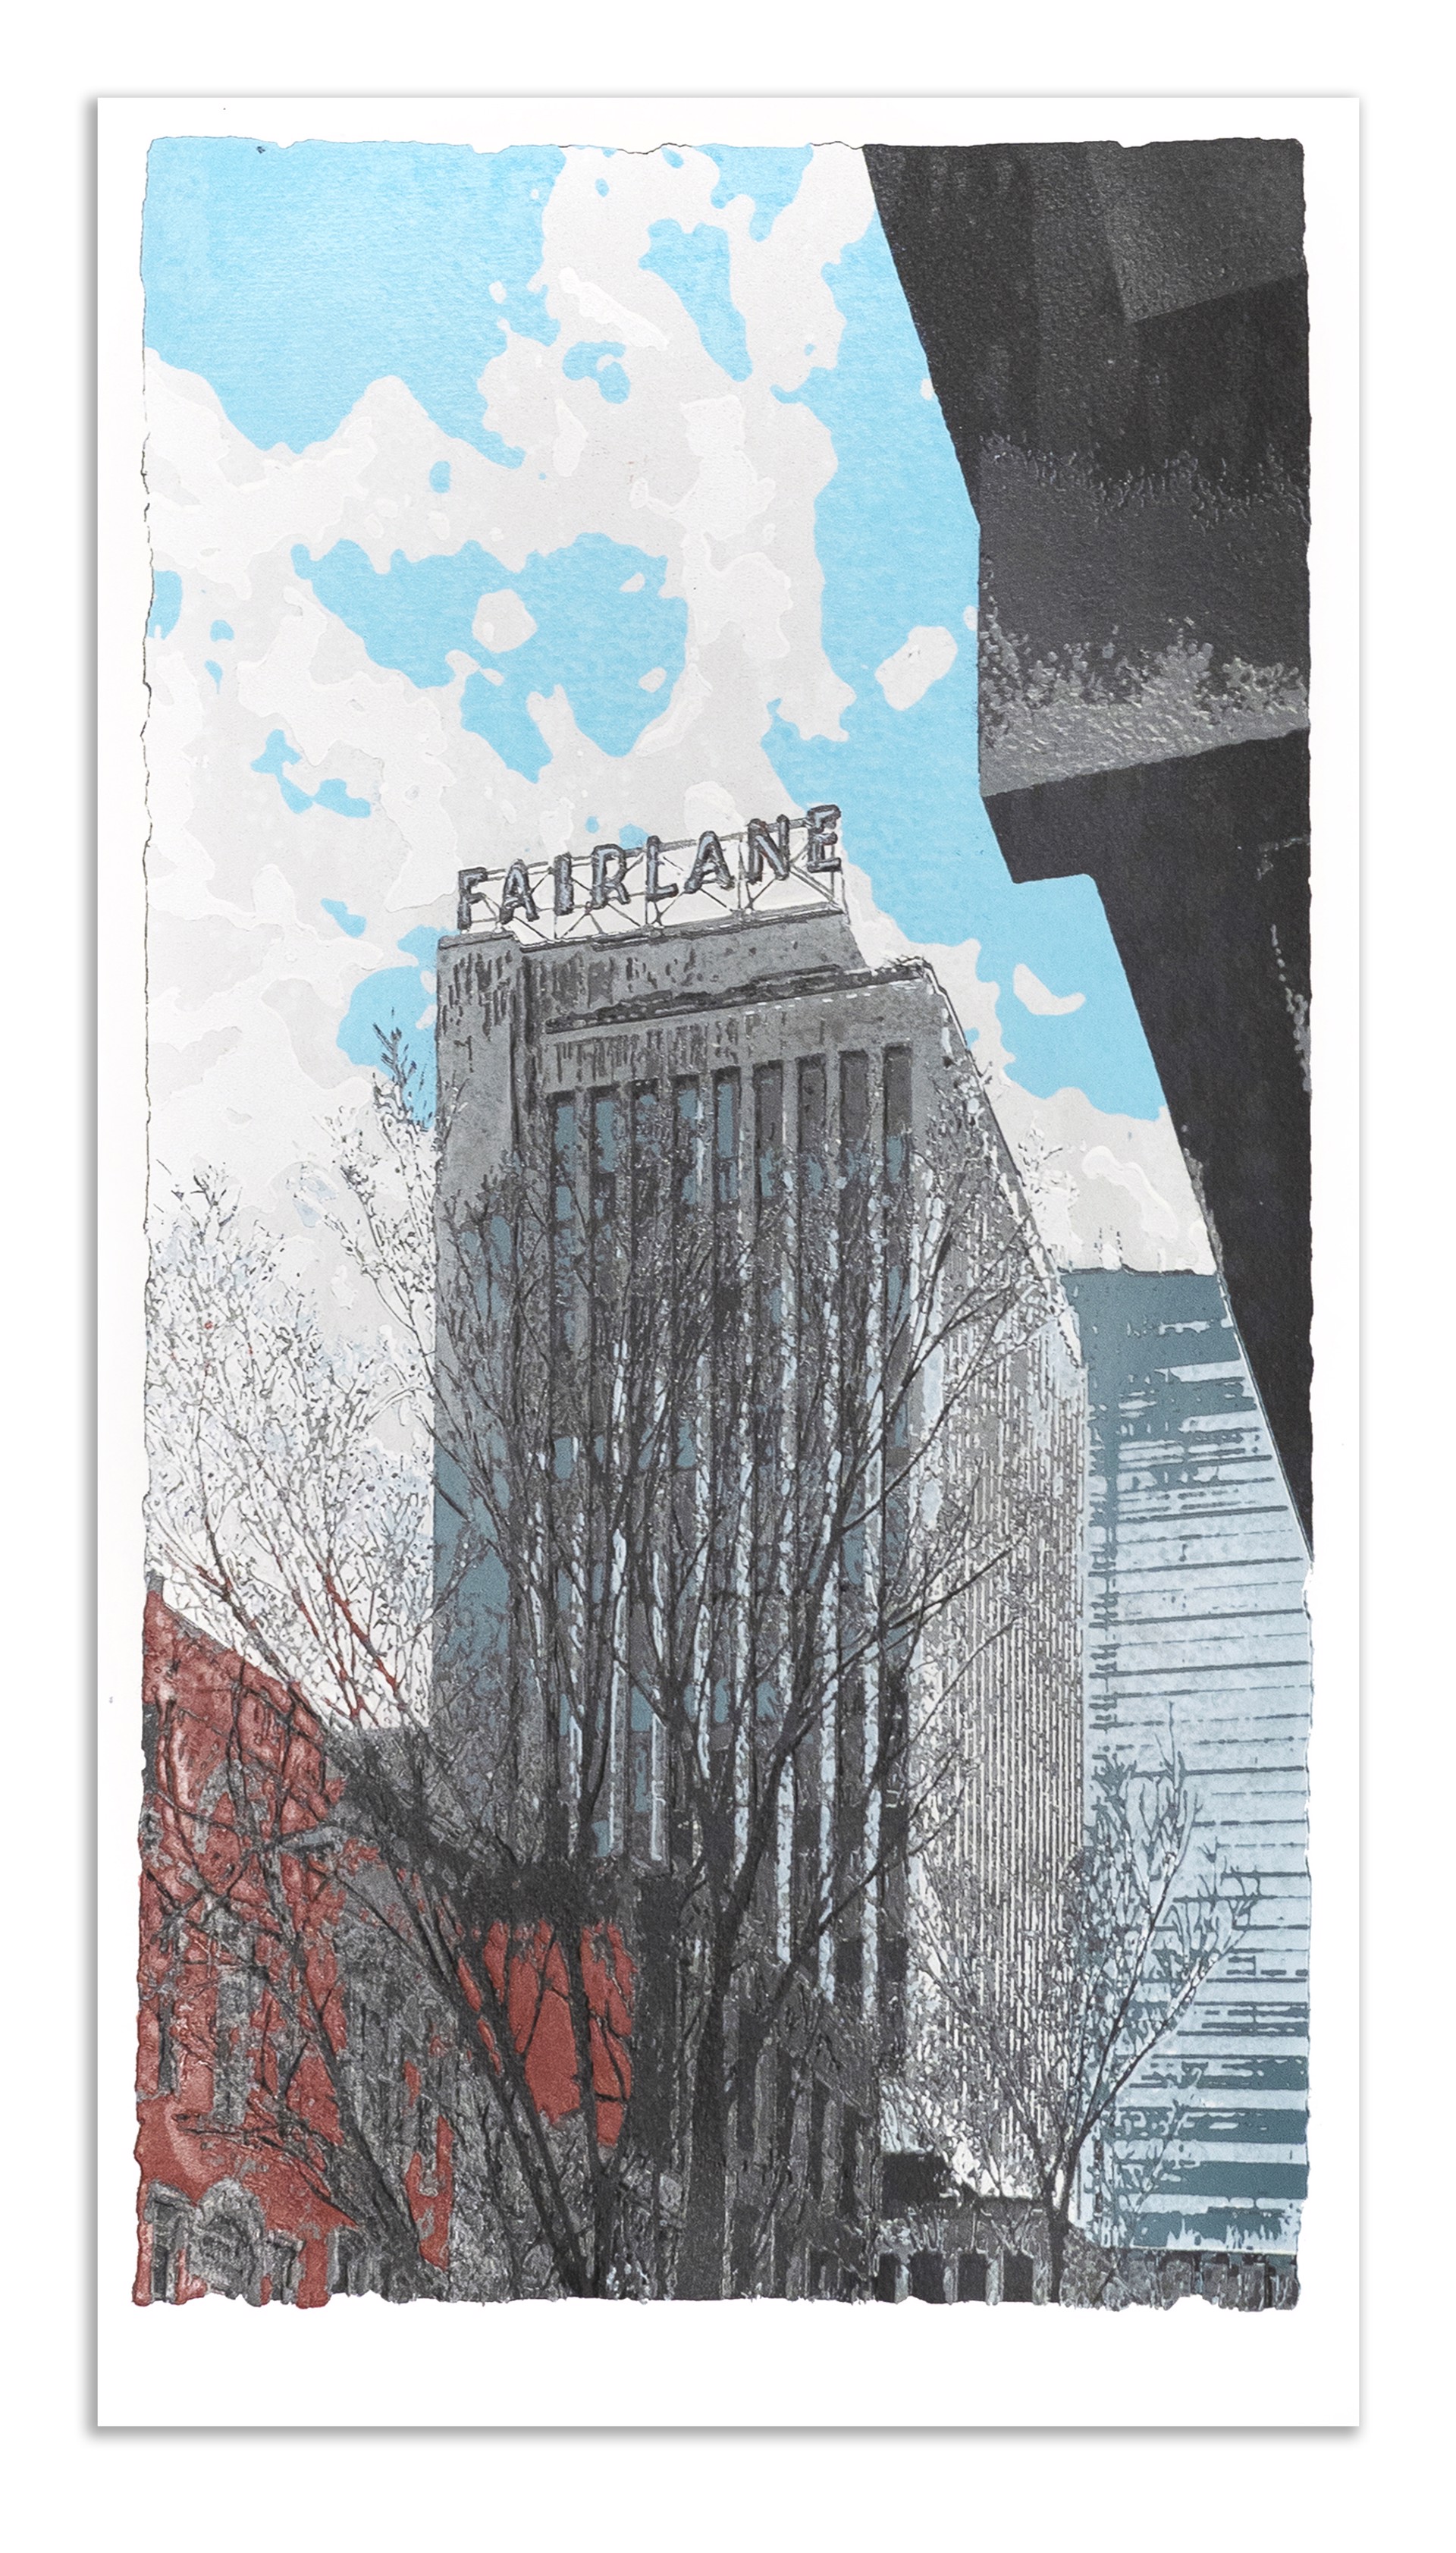 The Fairlane Hotel by Terrell Thornhill